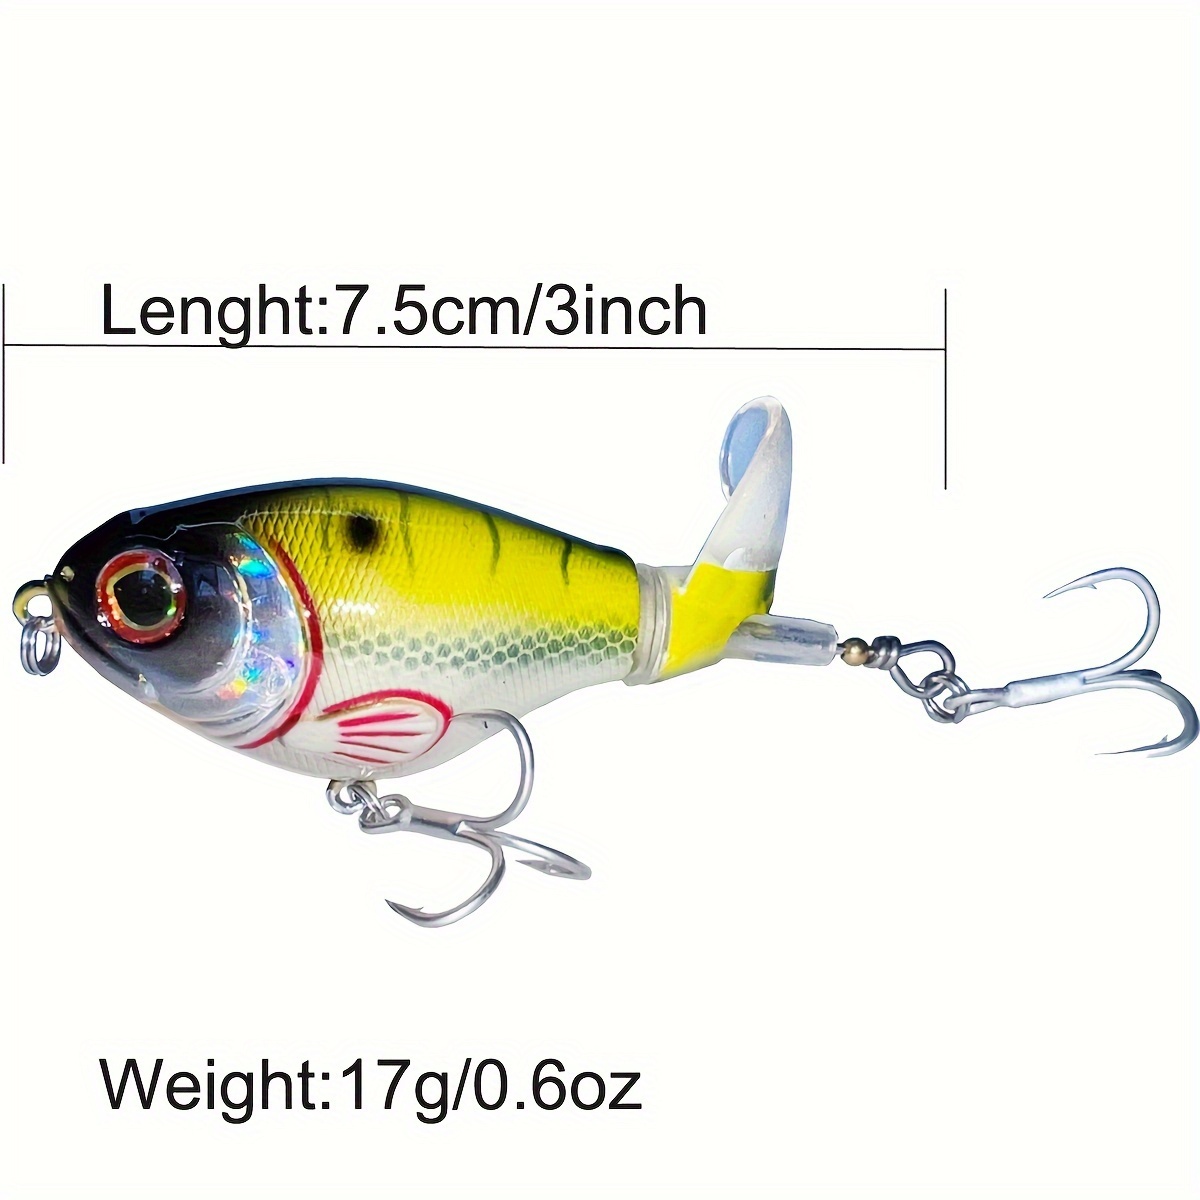 Top Water Fishing Lures for bass Lures with Tackle Box,Bass Whopper Lures  Kit,Pencil Plopper Fishing Lure for Trout Catfish Perch,Floating Lure with